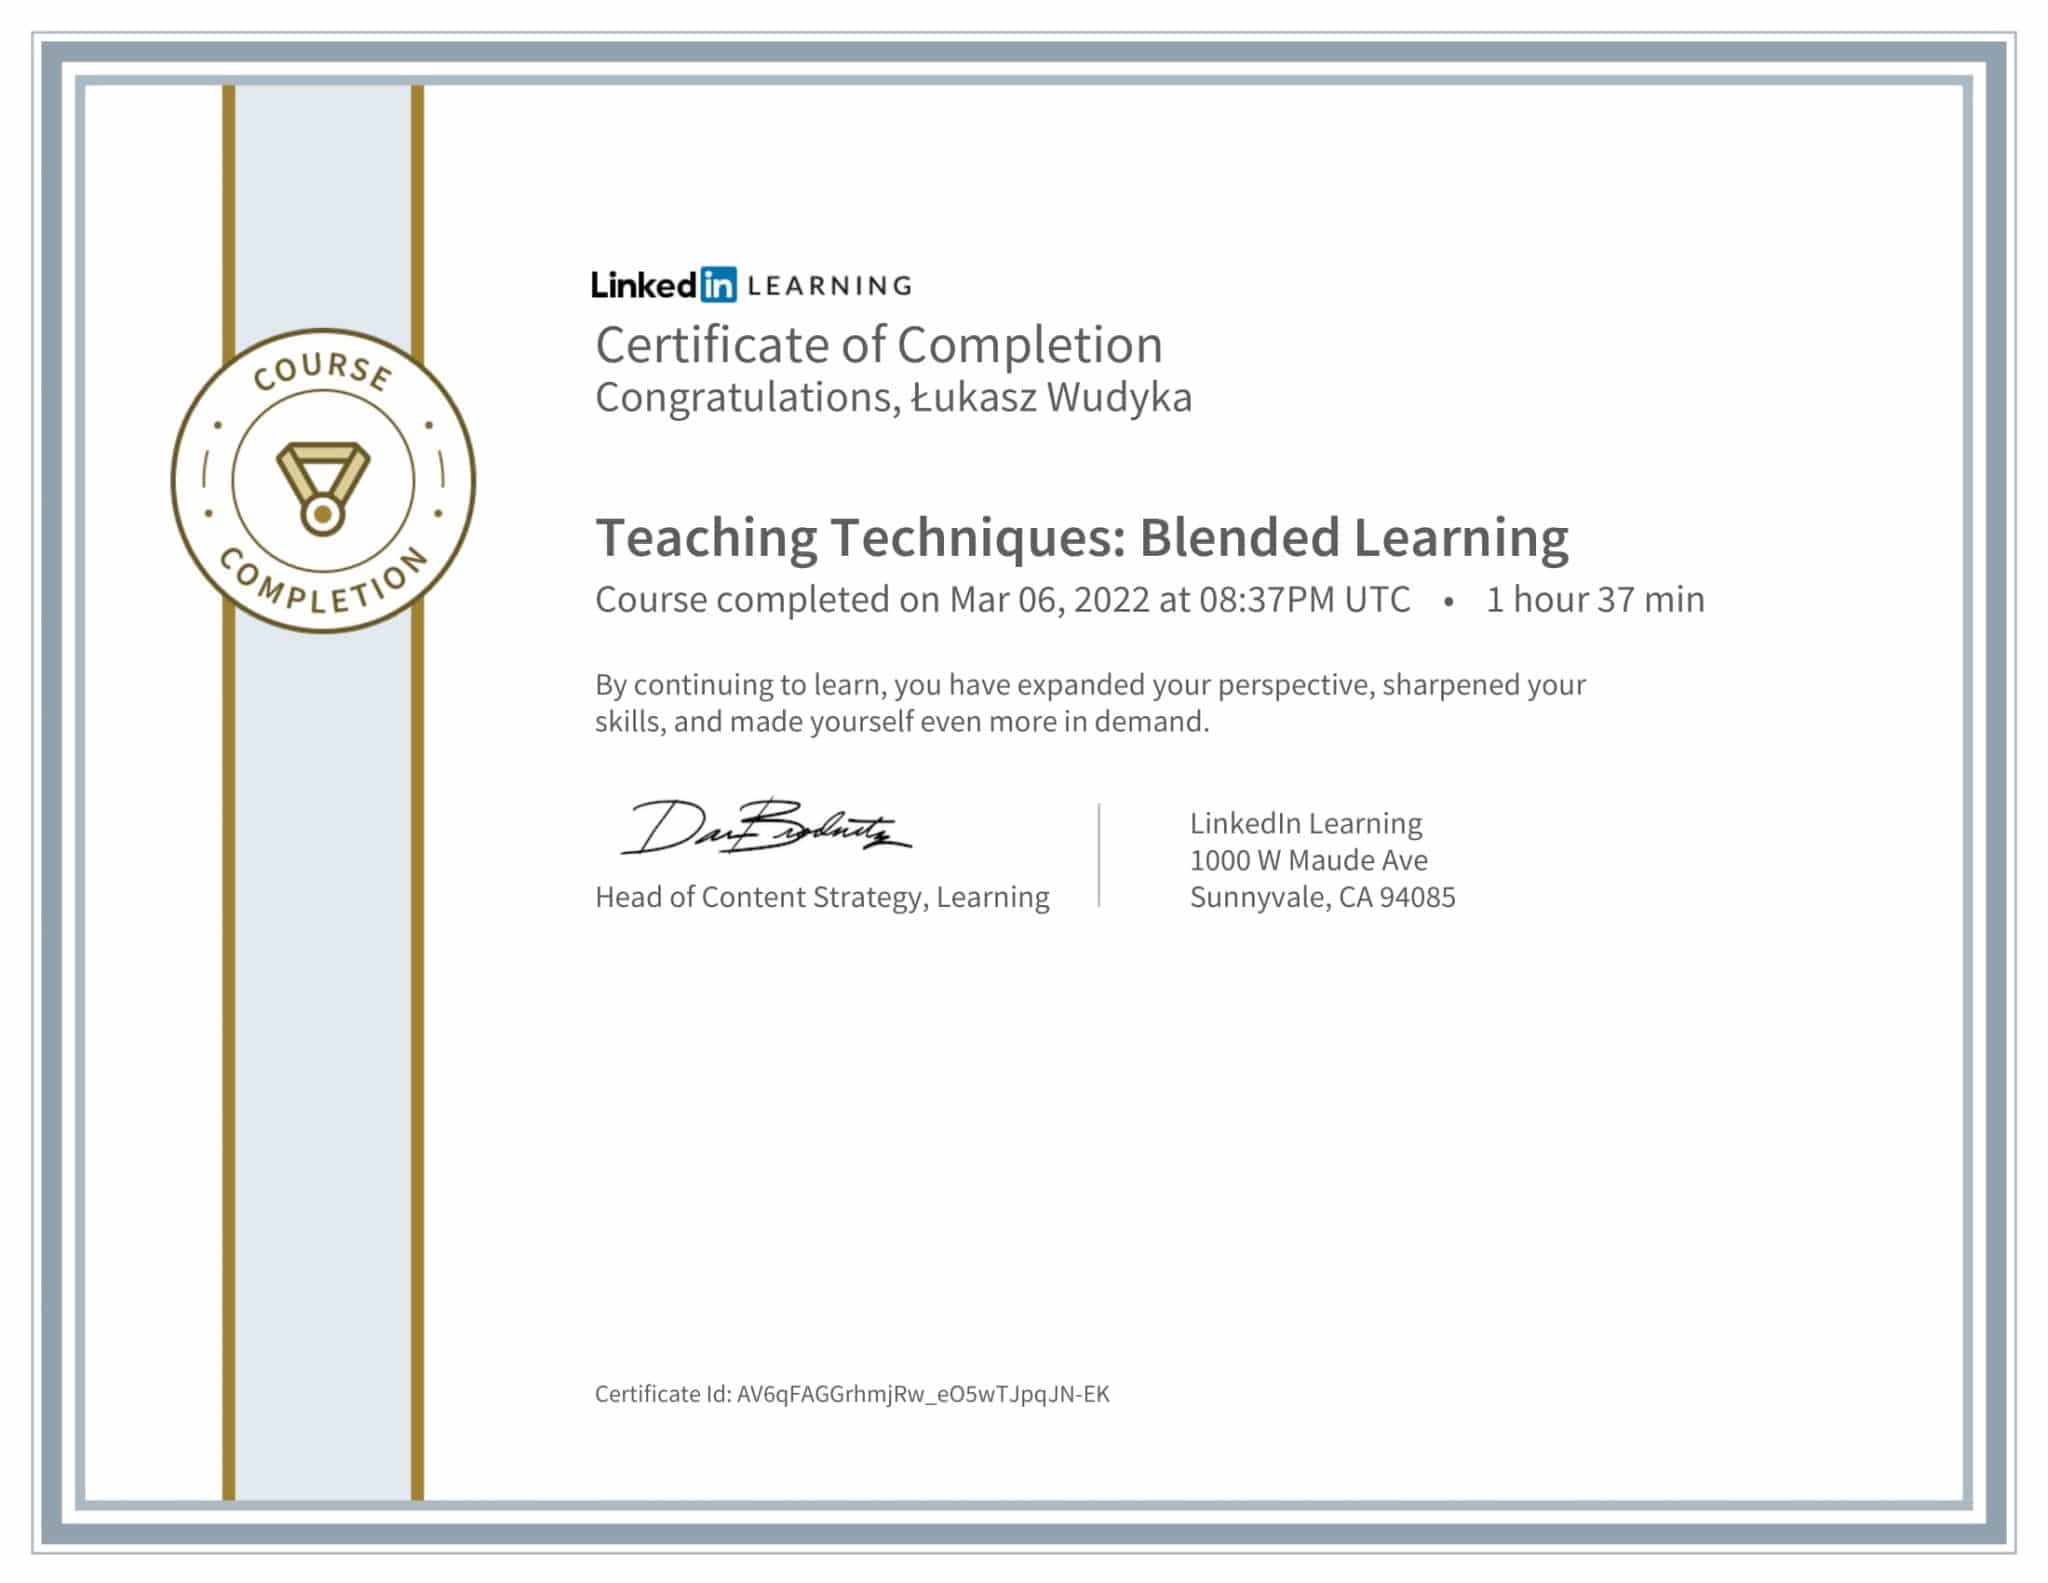 CertificateOfCompletion_Teaching Techniques Blended Learning-1